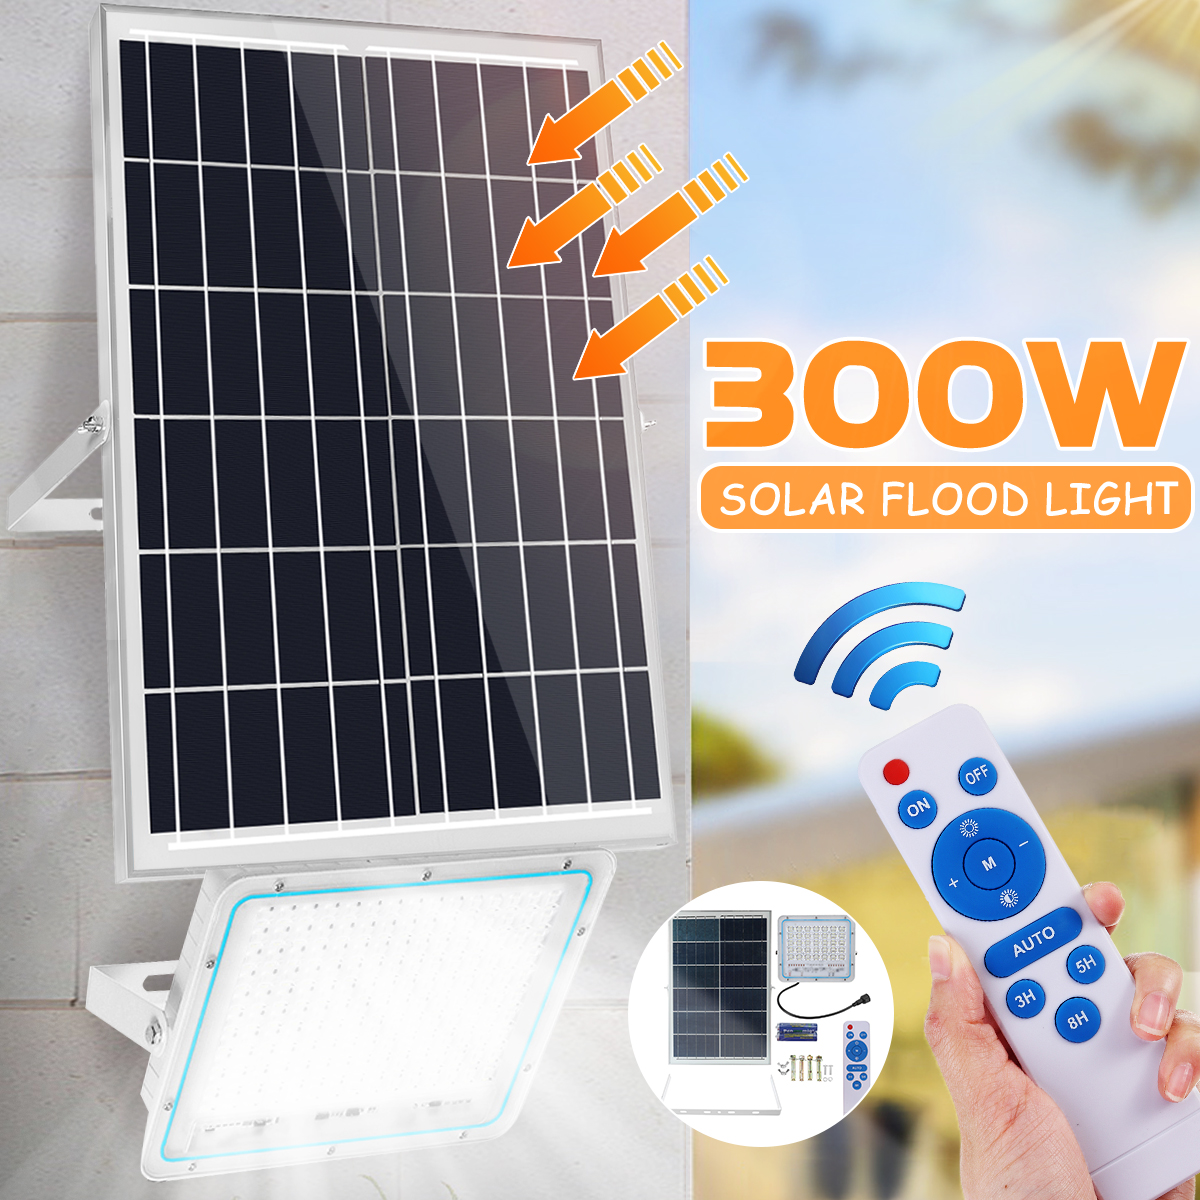 Find 300W 300LED 5000LM Solar Powered Flood Light Remote Control Light Sensor Timing Outdoor Waterproof IP65 for Sale on Gipsybee.com with cryptocurrencies